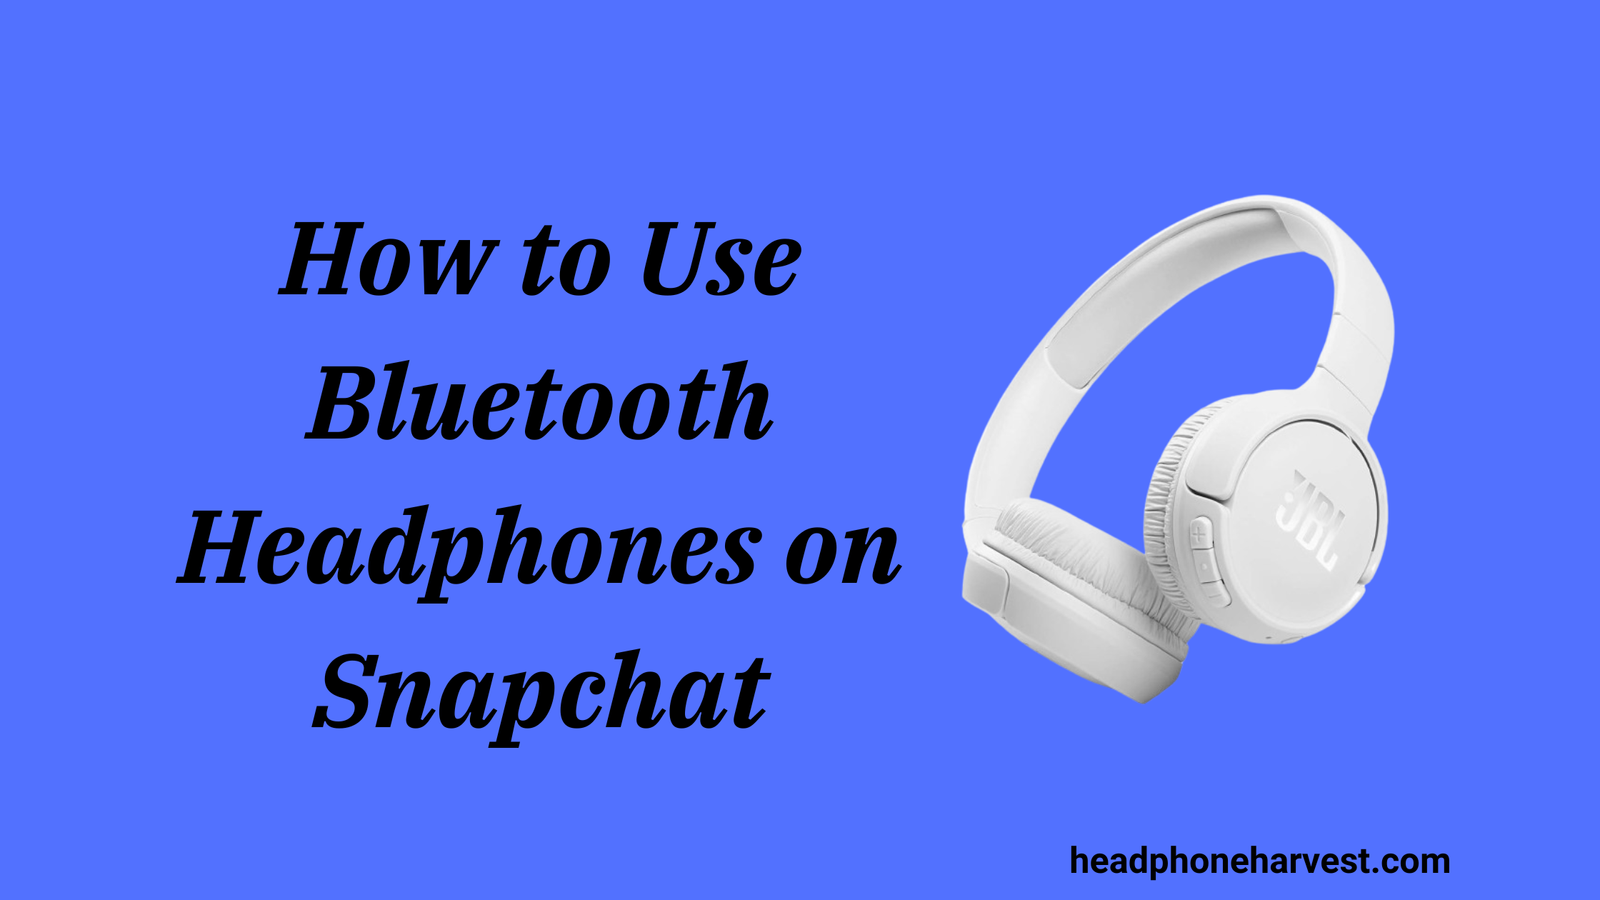 How to Use Bluetooth Headphones on Snapchat